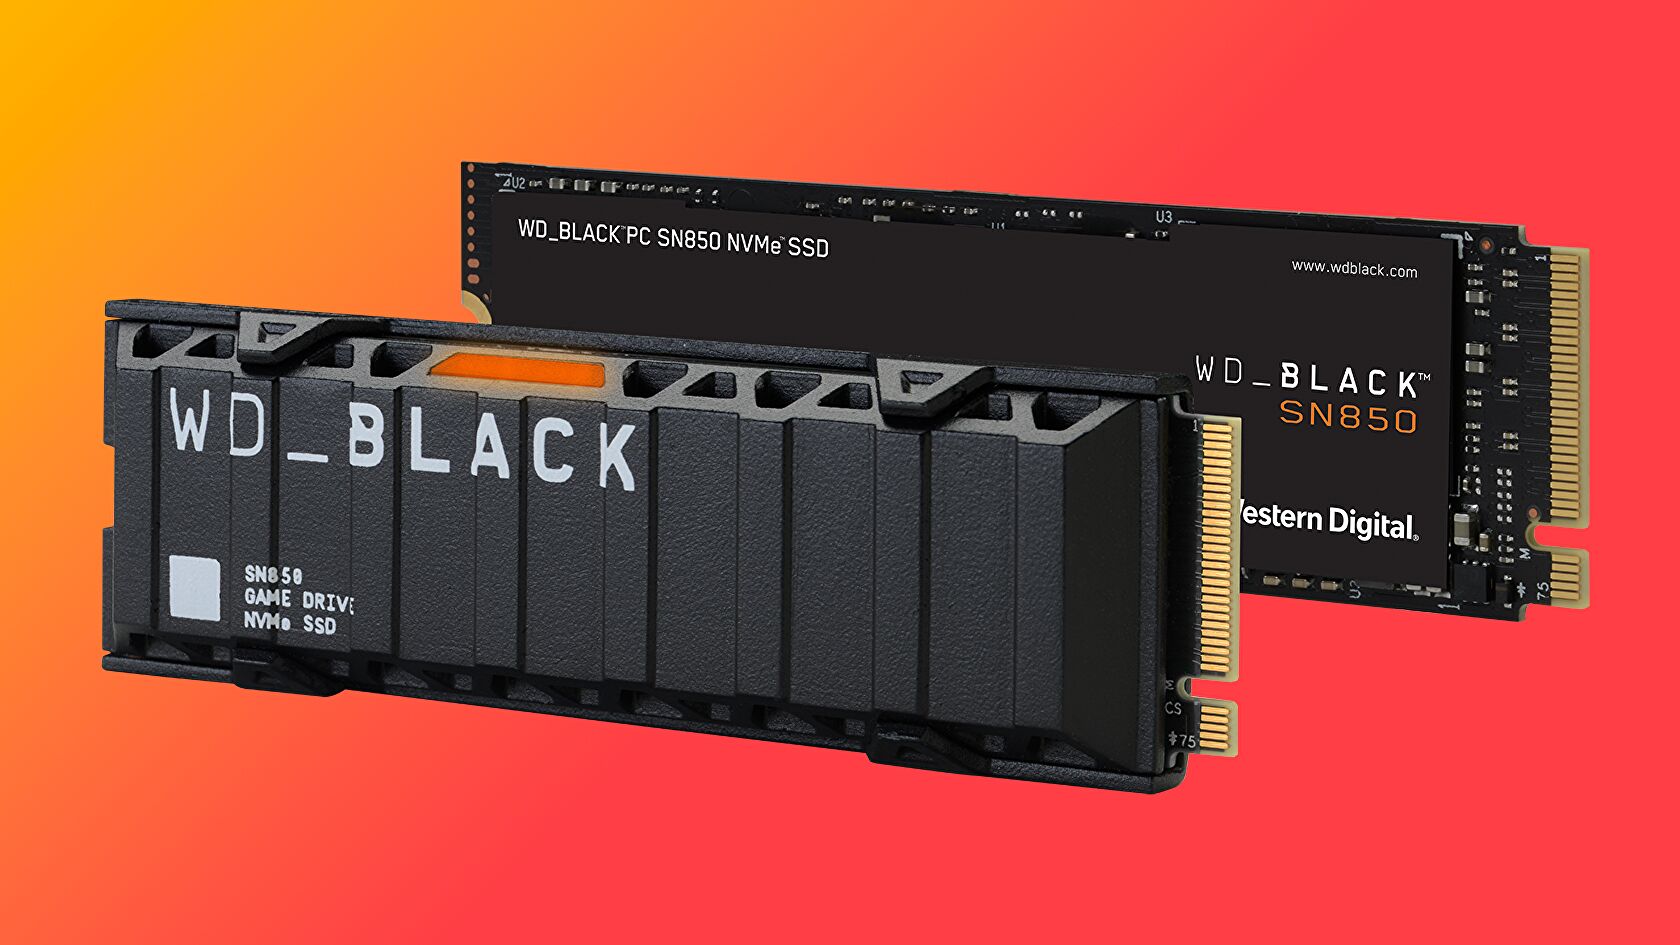 The super-fast WD Black SN850 NVMe SSD is going cheap at Best Buy